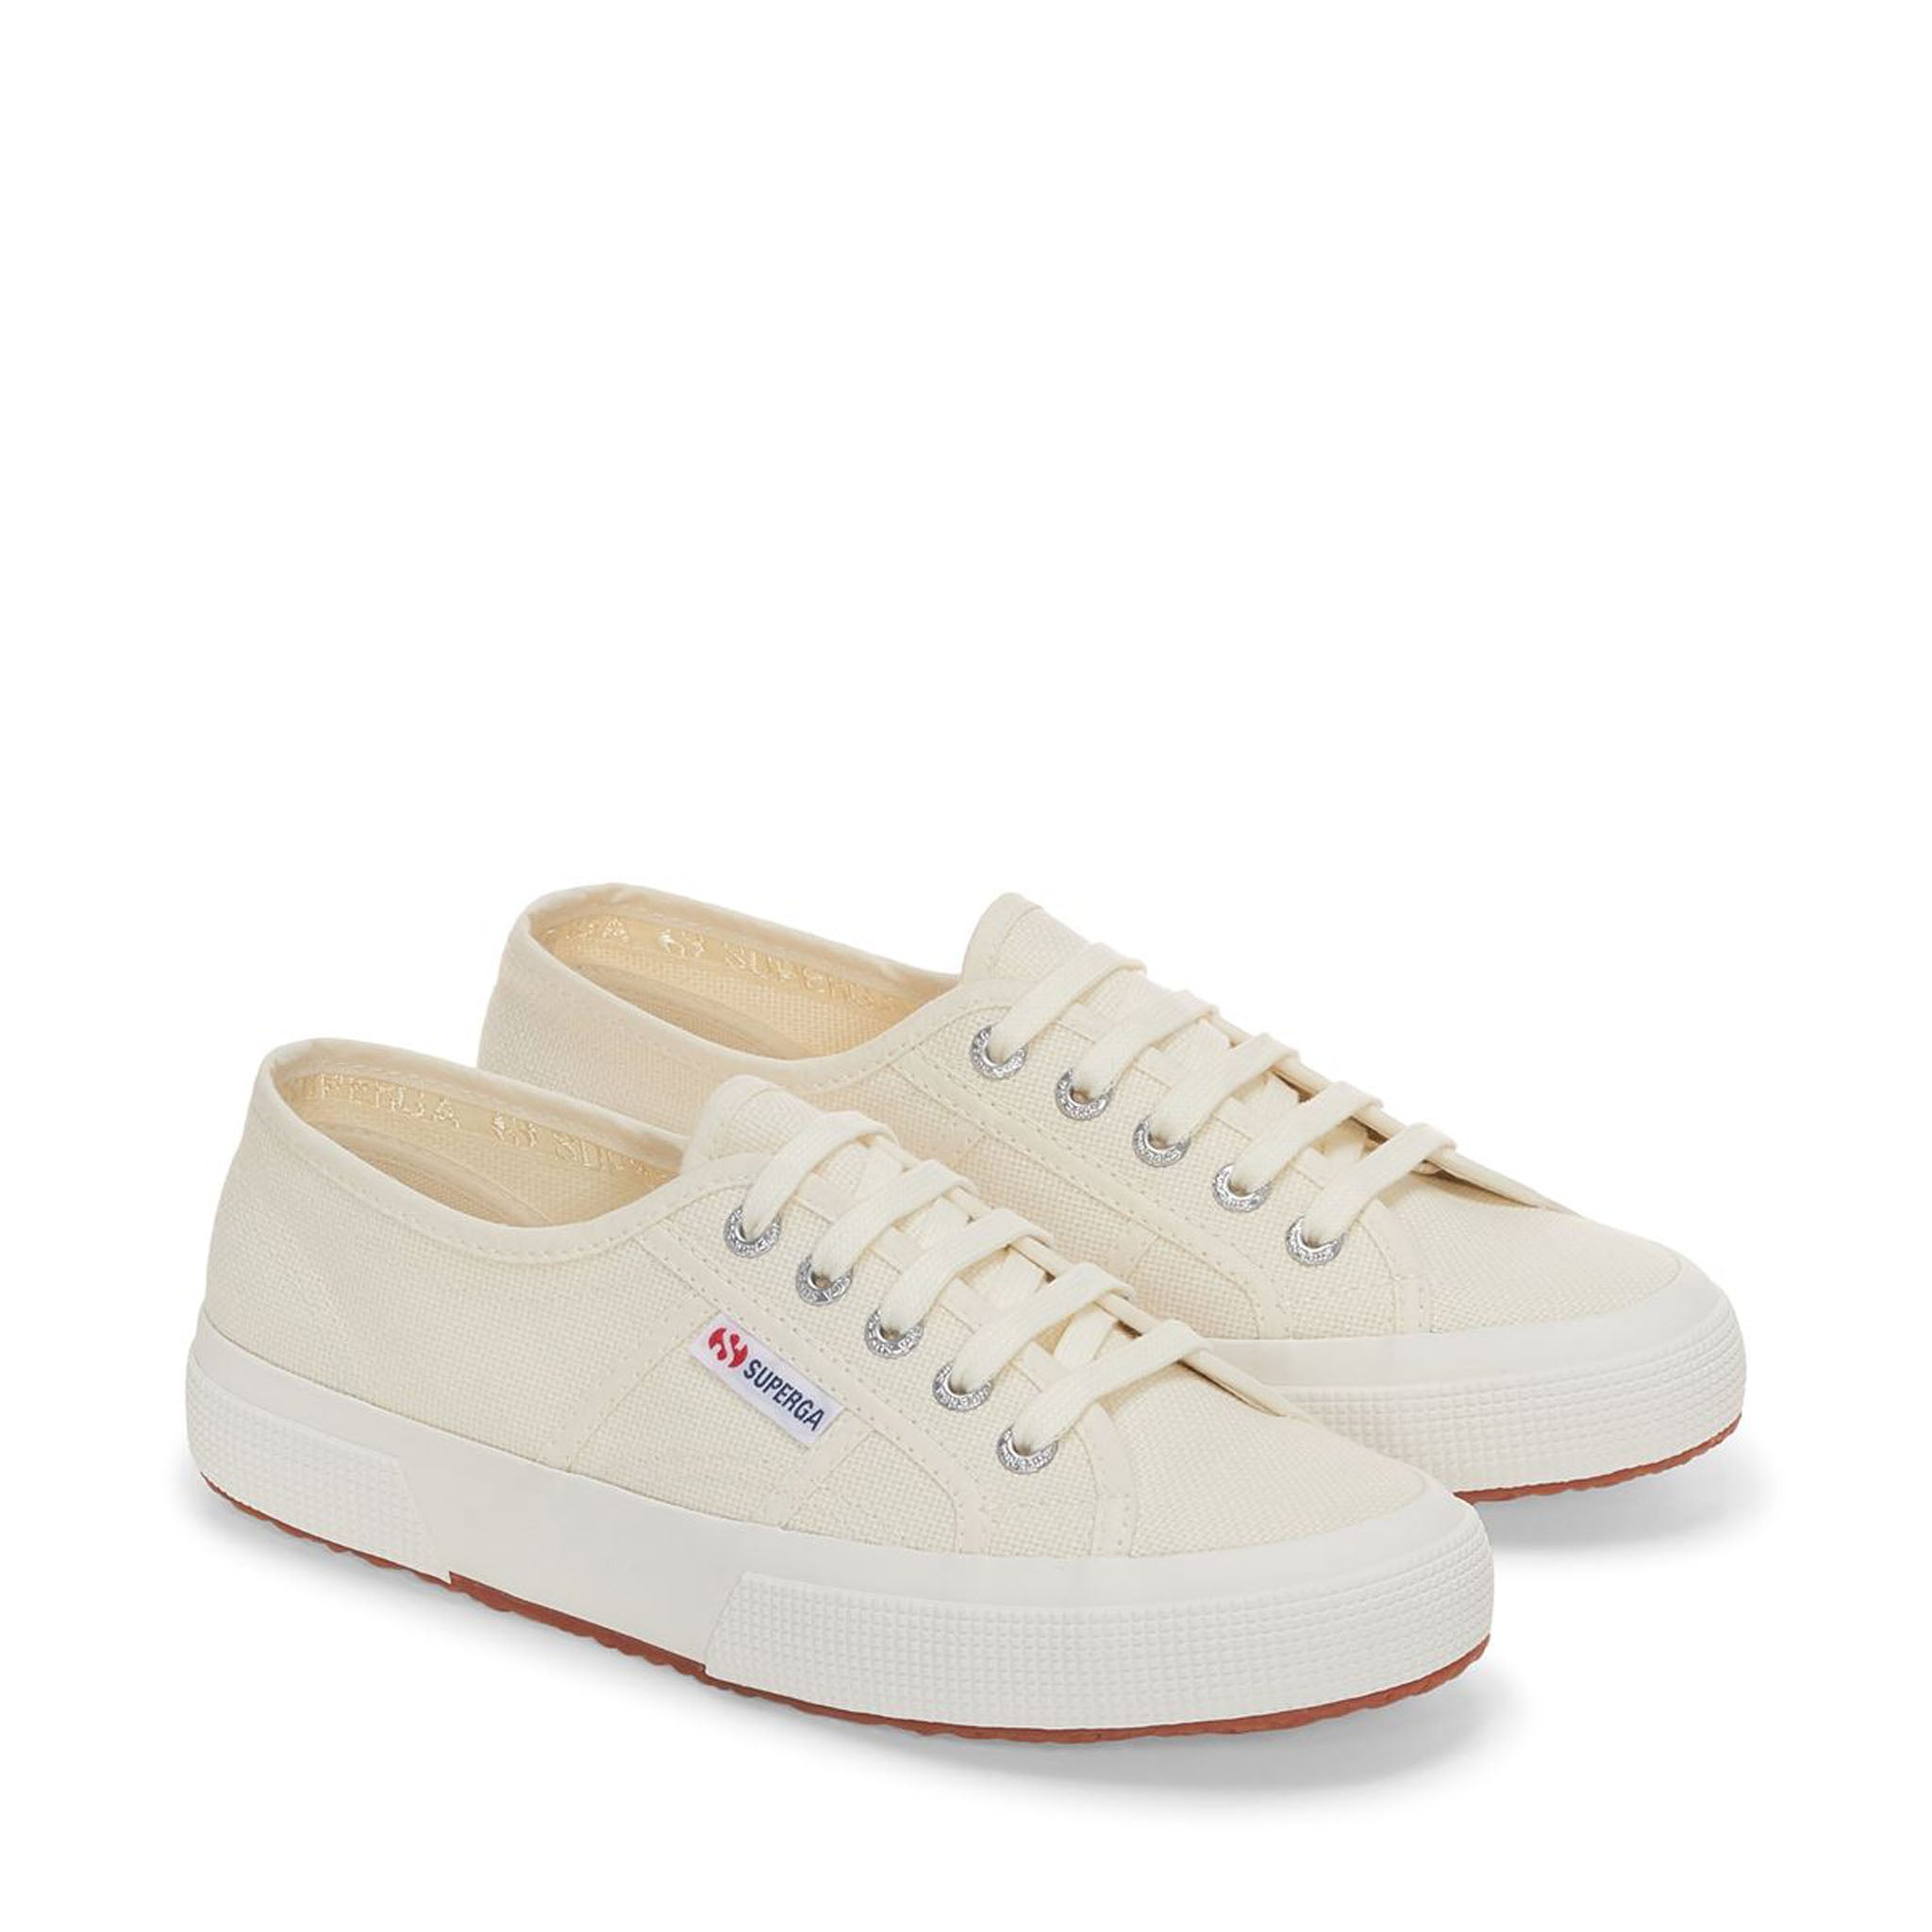 Superga 2750 Classic Silver Plimsoll Trainers | Tennis shoe outfits summer, Tennis  shoes outfit, Outfit shoes